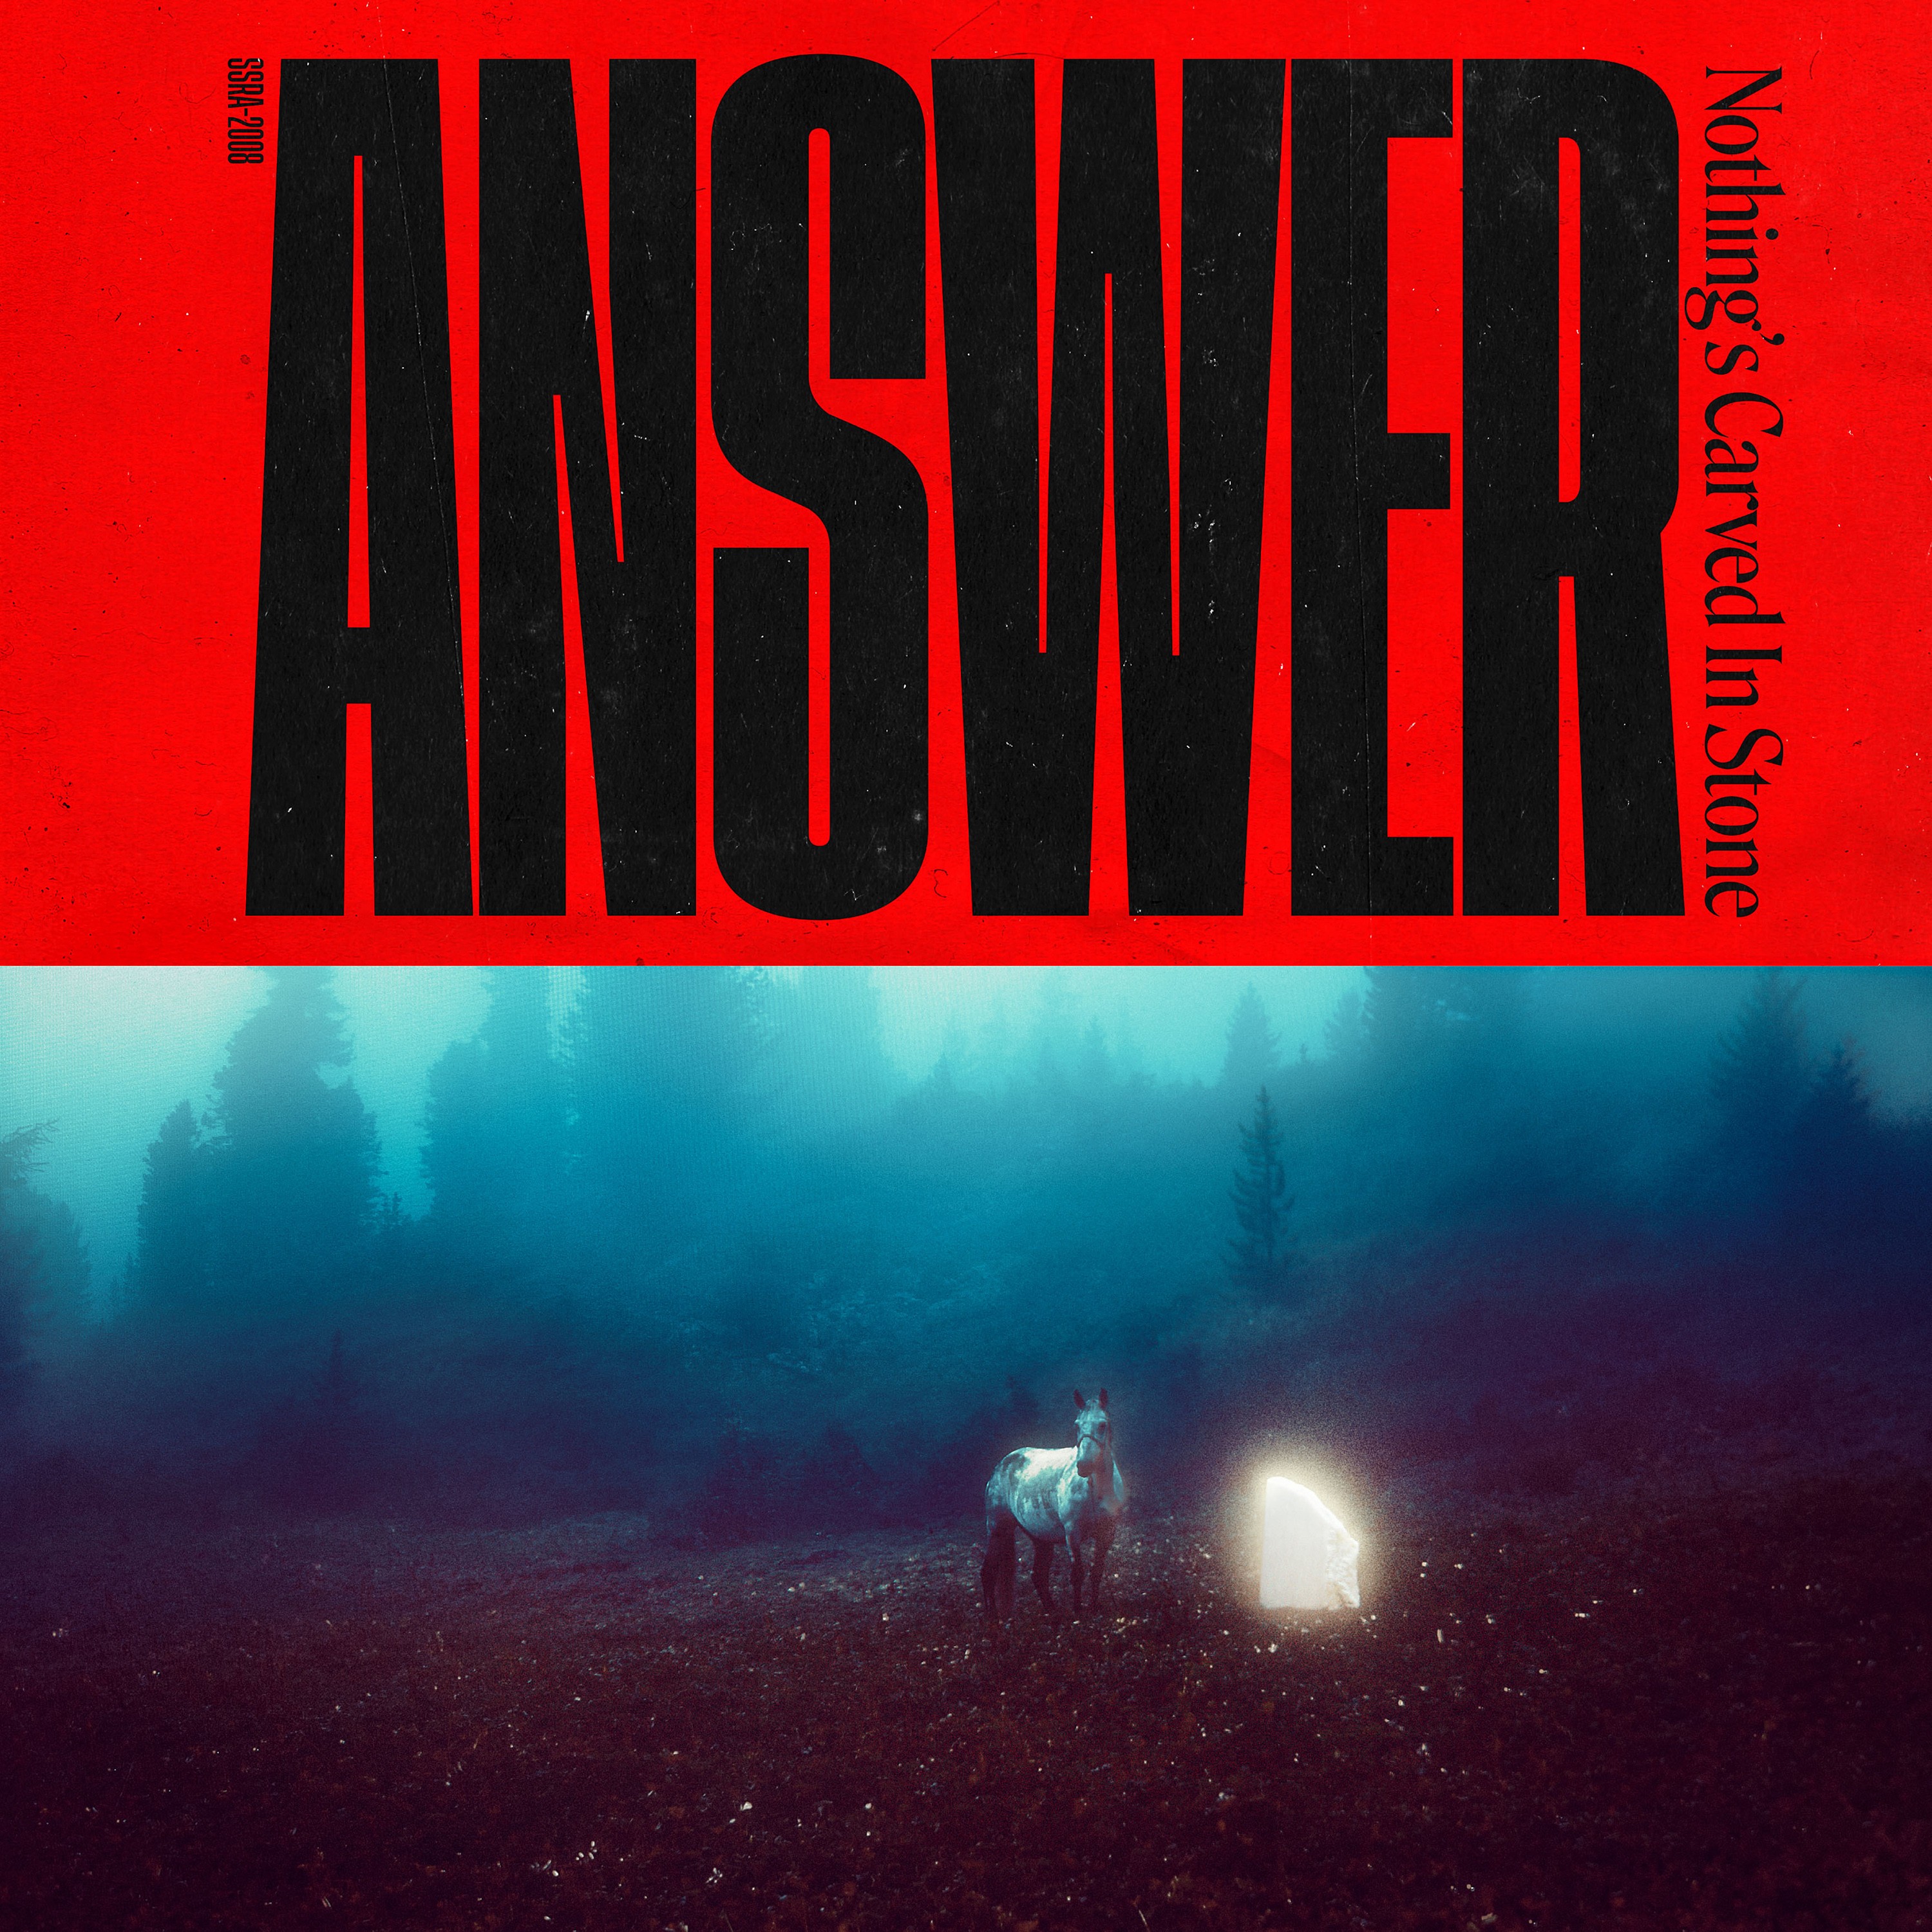 [Album] Nothing’s Carved In Stone – ANSWER (2021-12-01) [FLAC 24bit/96kHz]